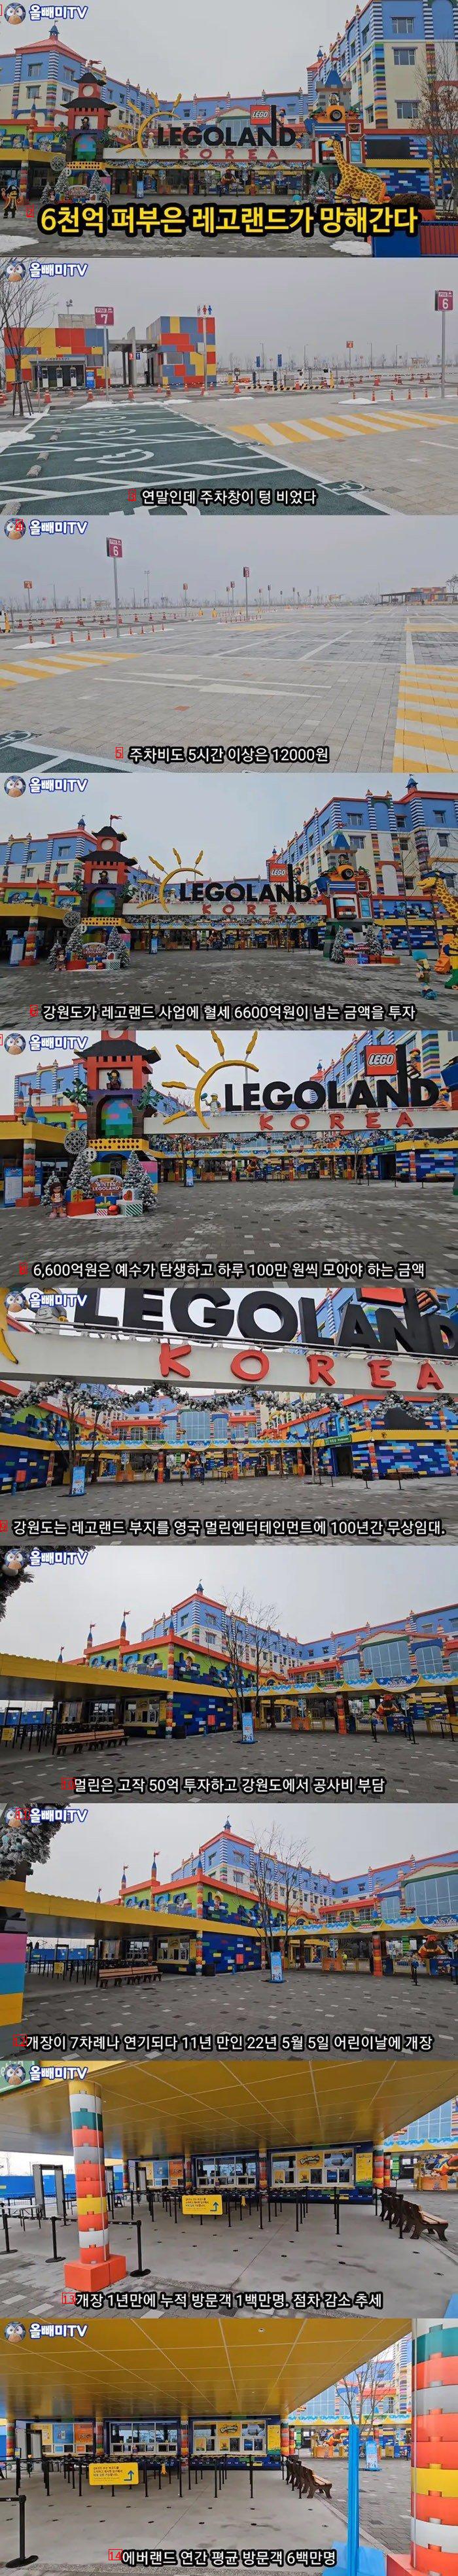 What's up with Legoland